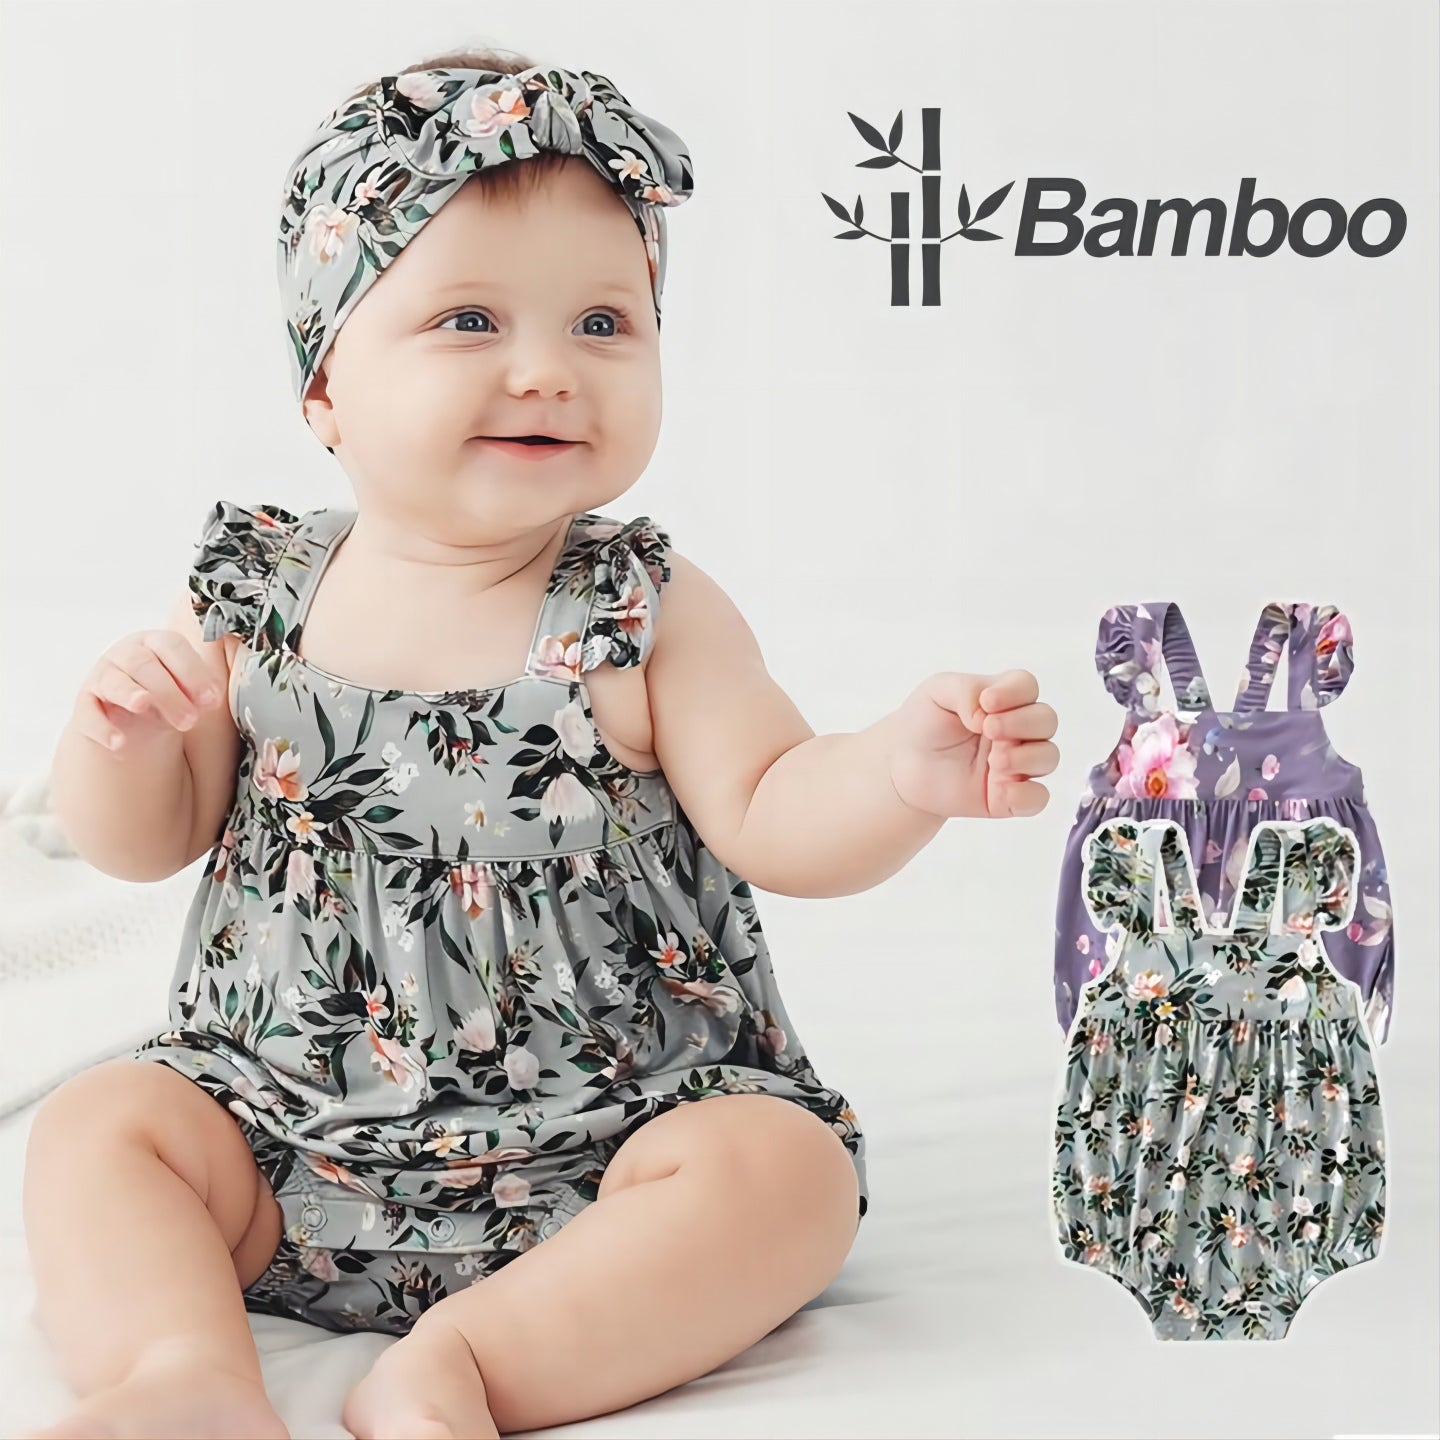 Why Do Mothers Wear Rompers For Their Babies?